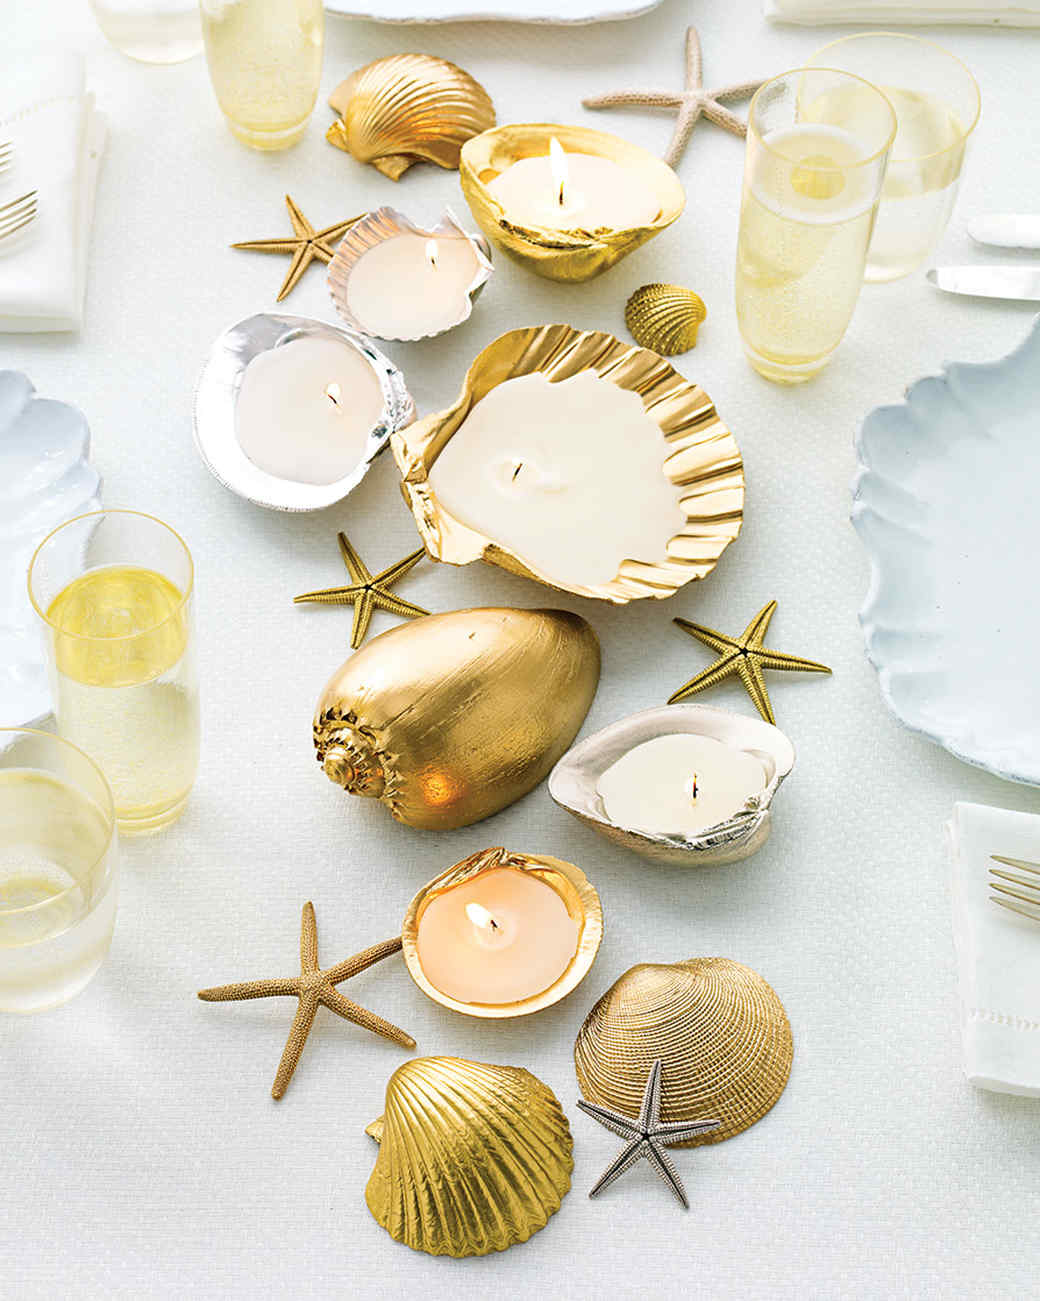 Beautiful DIY Shell Decor To Make This Summer - Page 2 of 2